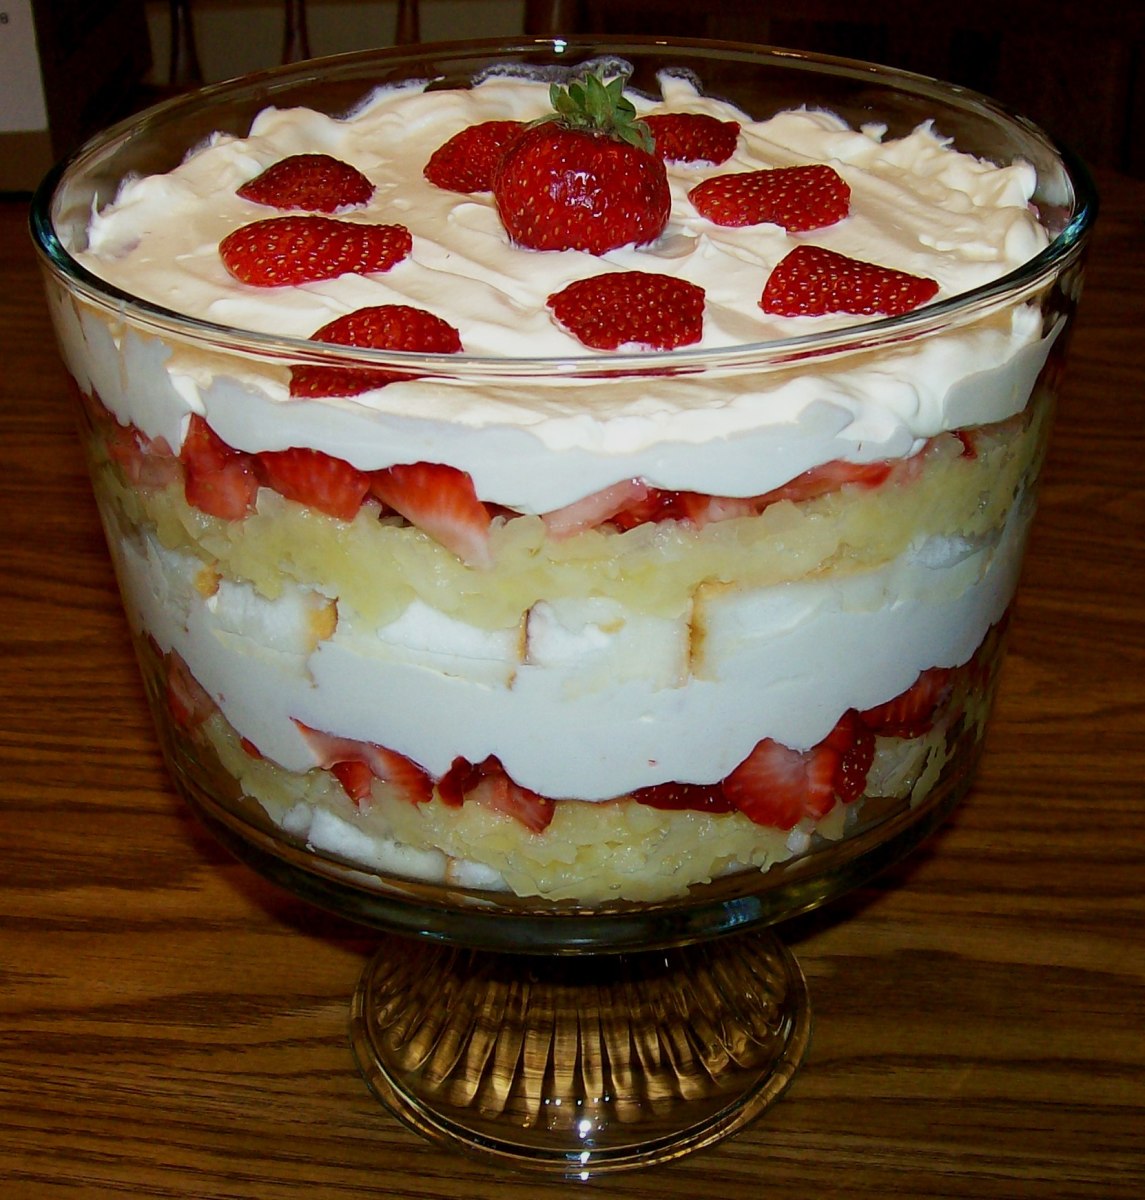 A trifle bowl accentuates the layered aspect of the dessert.